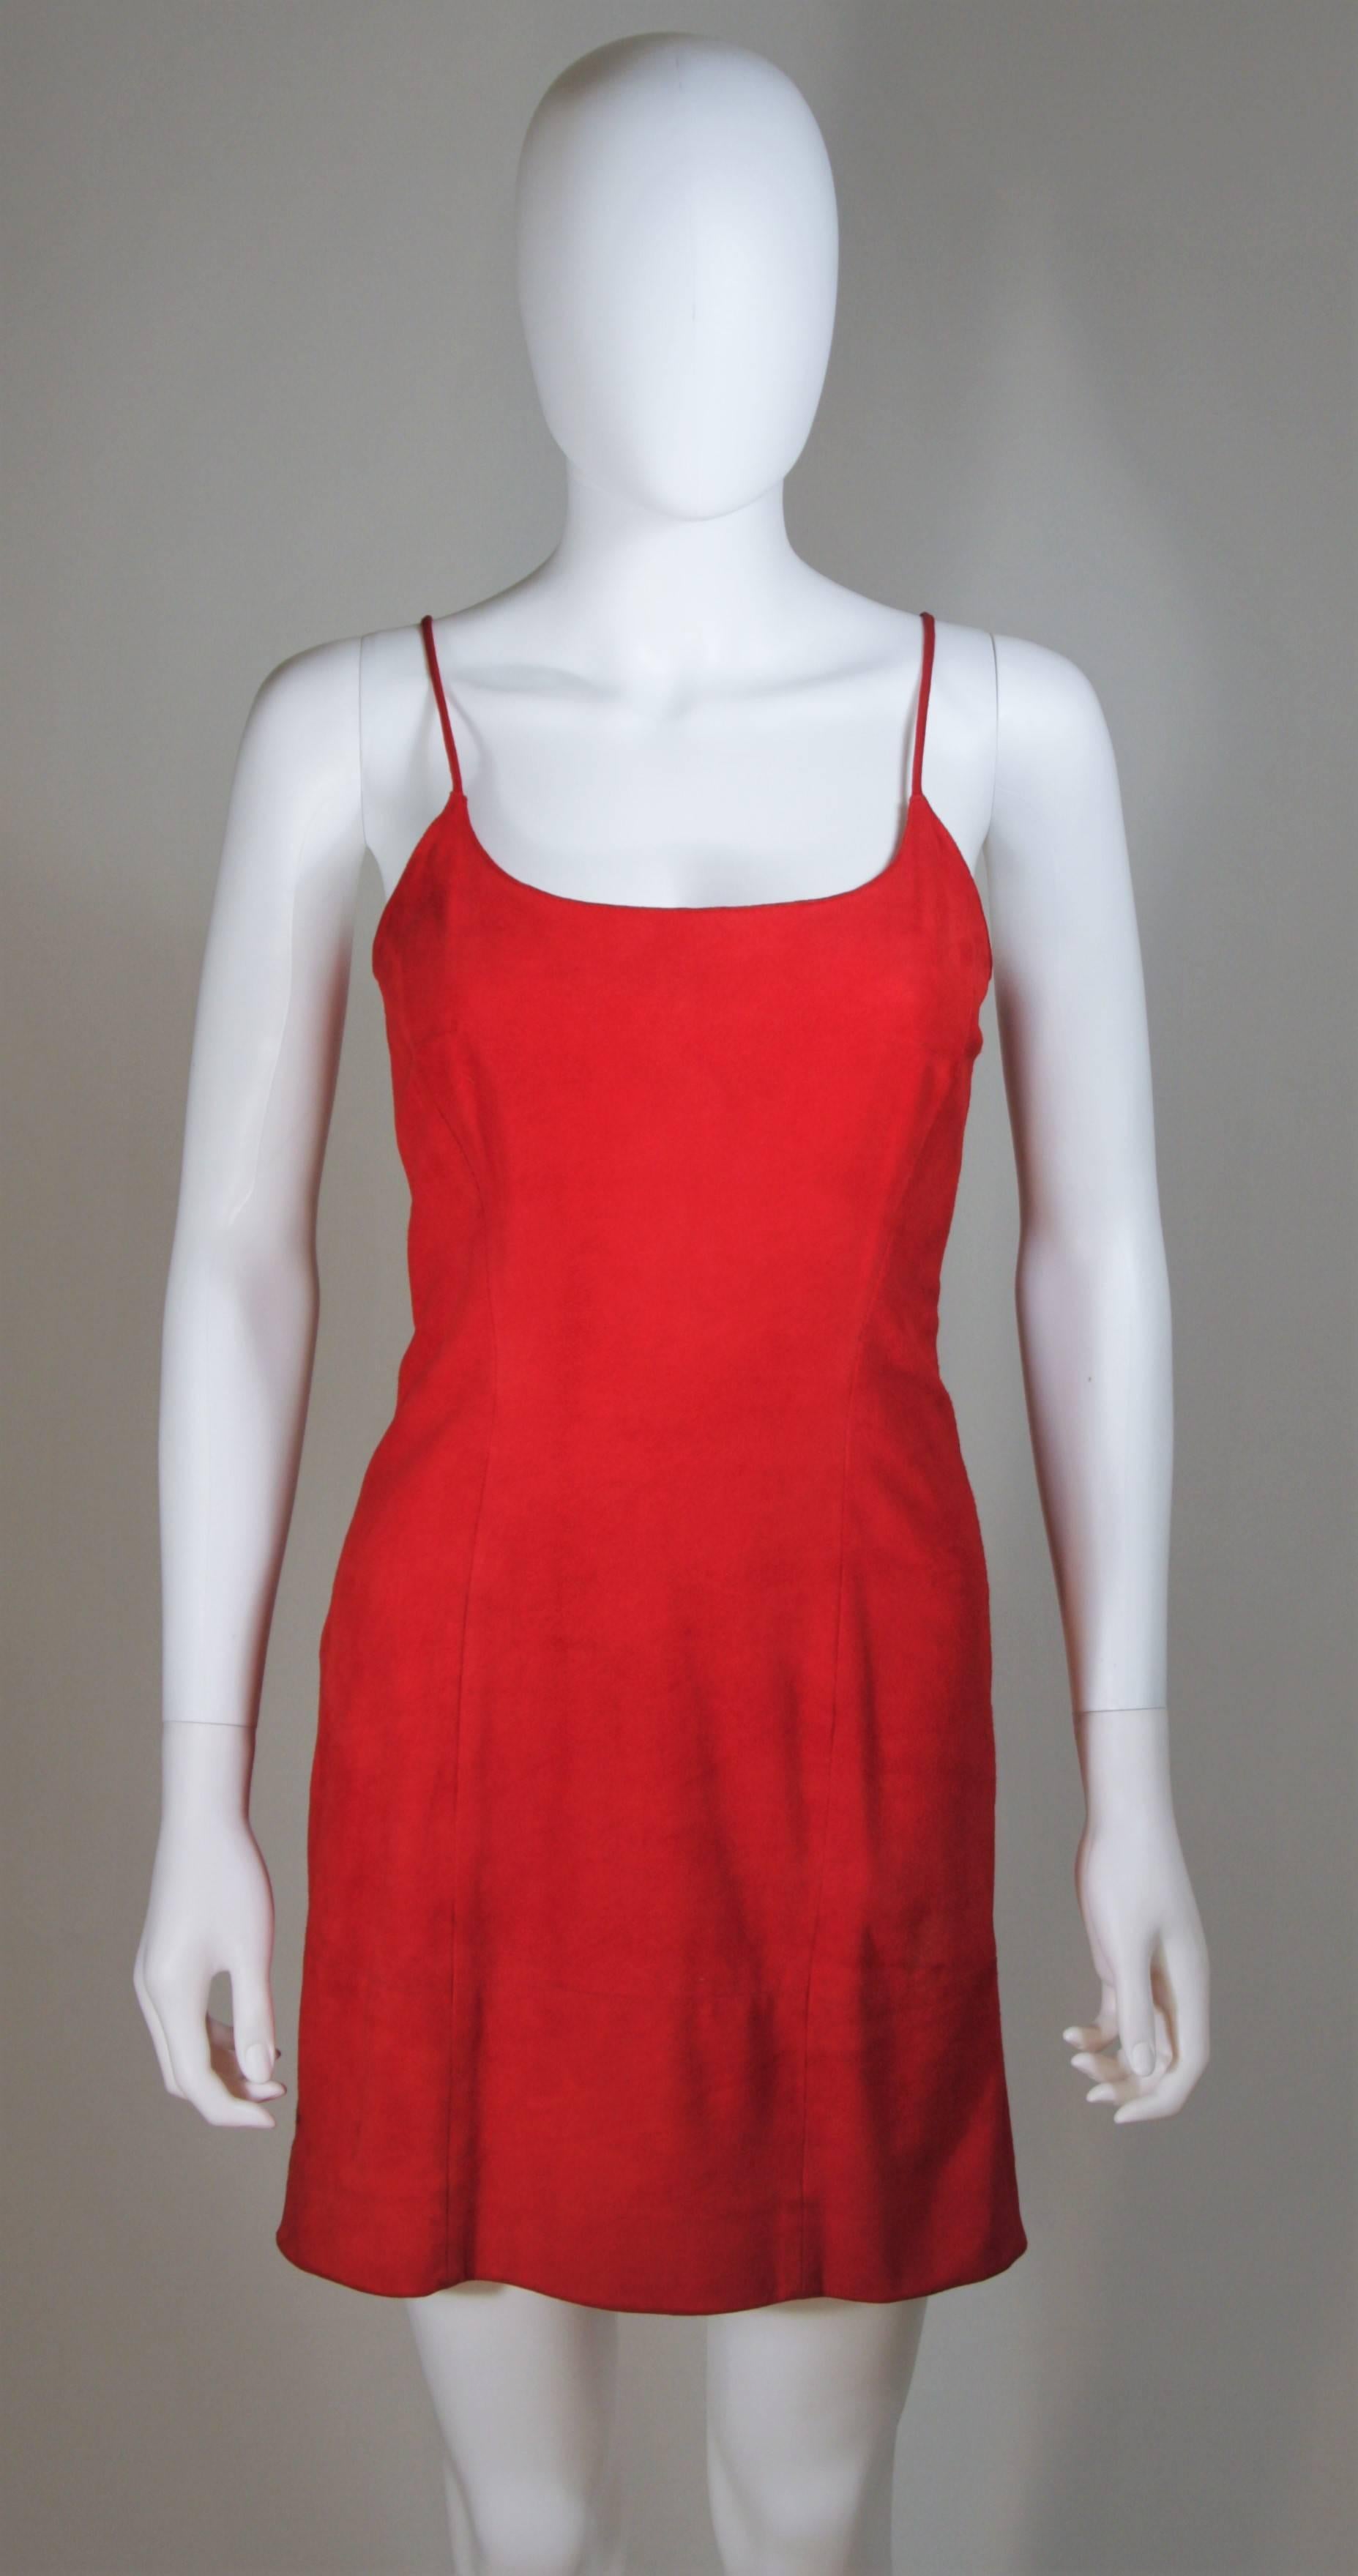   This Gucci design is available for viewing at our Beverly Hills Boutique. We offer a large selection of evening gowns and luxury garments. 

 This dress is composed of a red suede. Features an A-Line silhouette and center back zipper. In